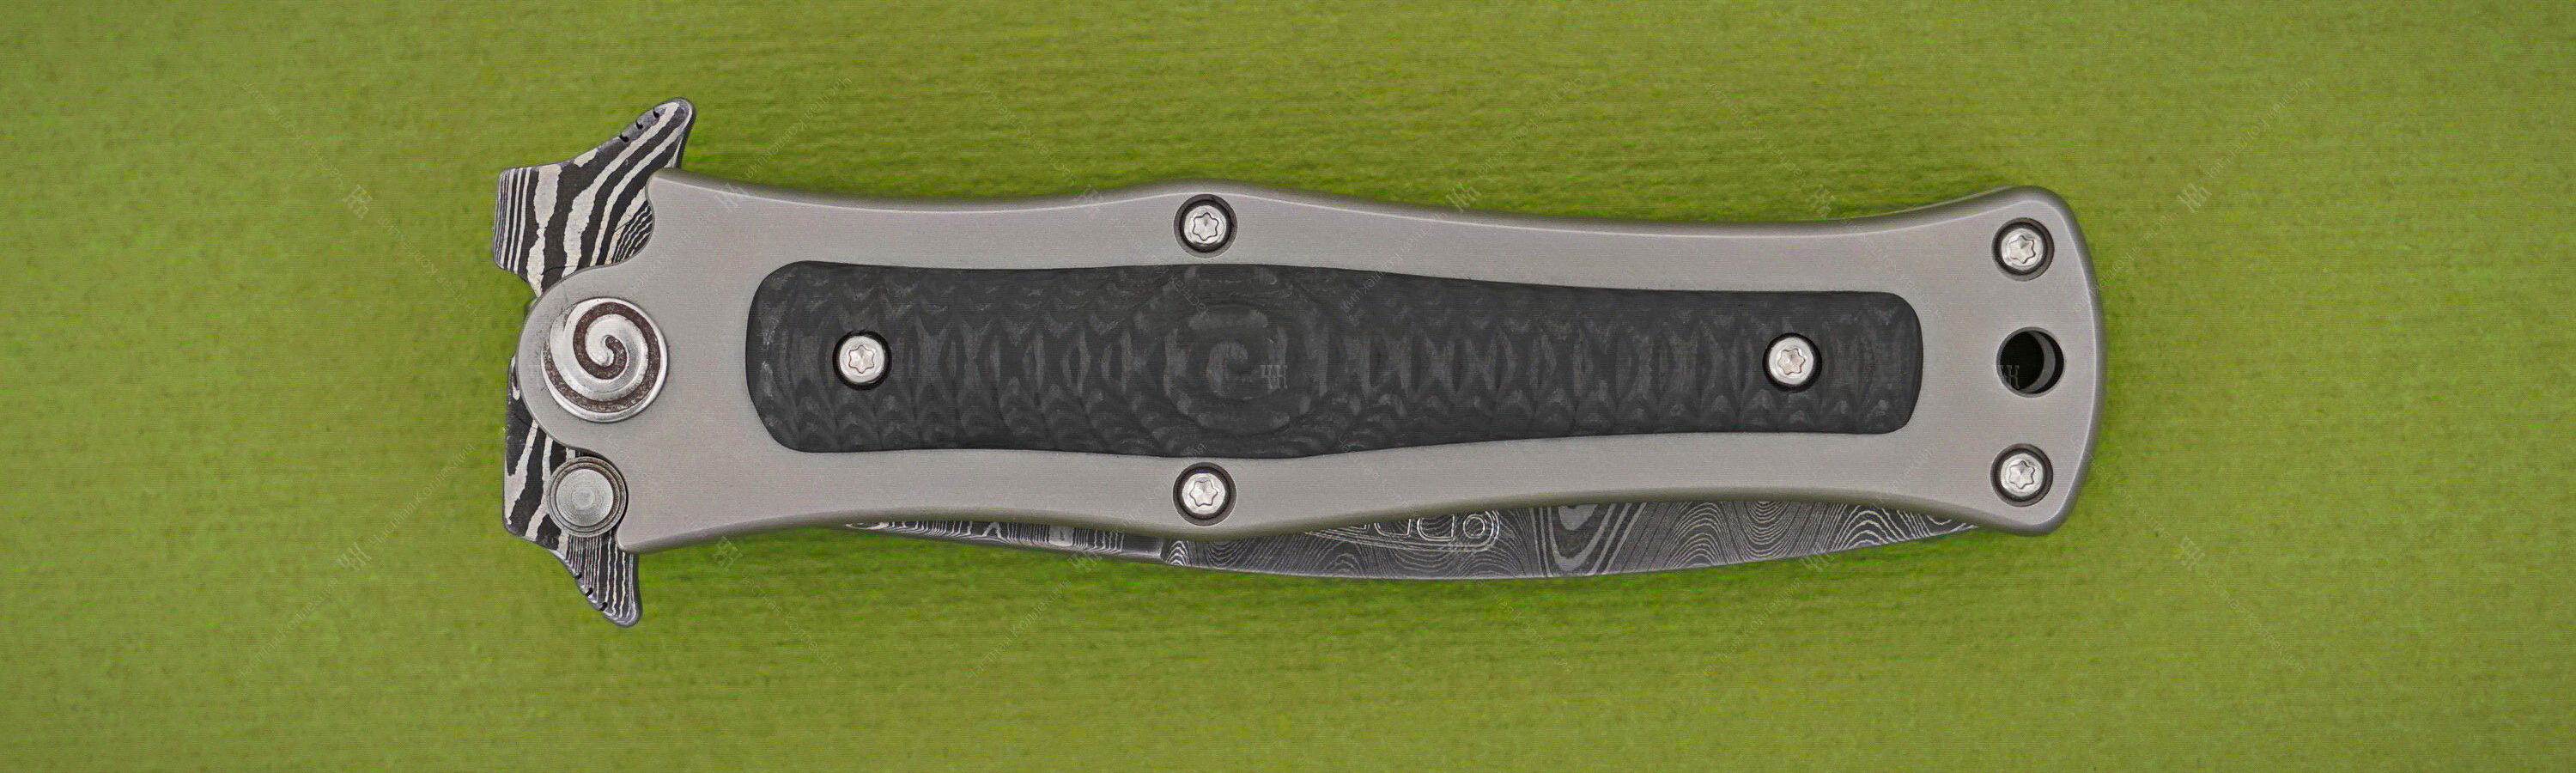 6AL4V handle with carbon insert